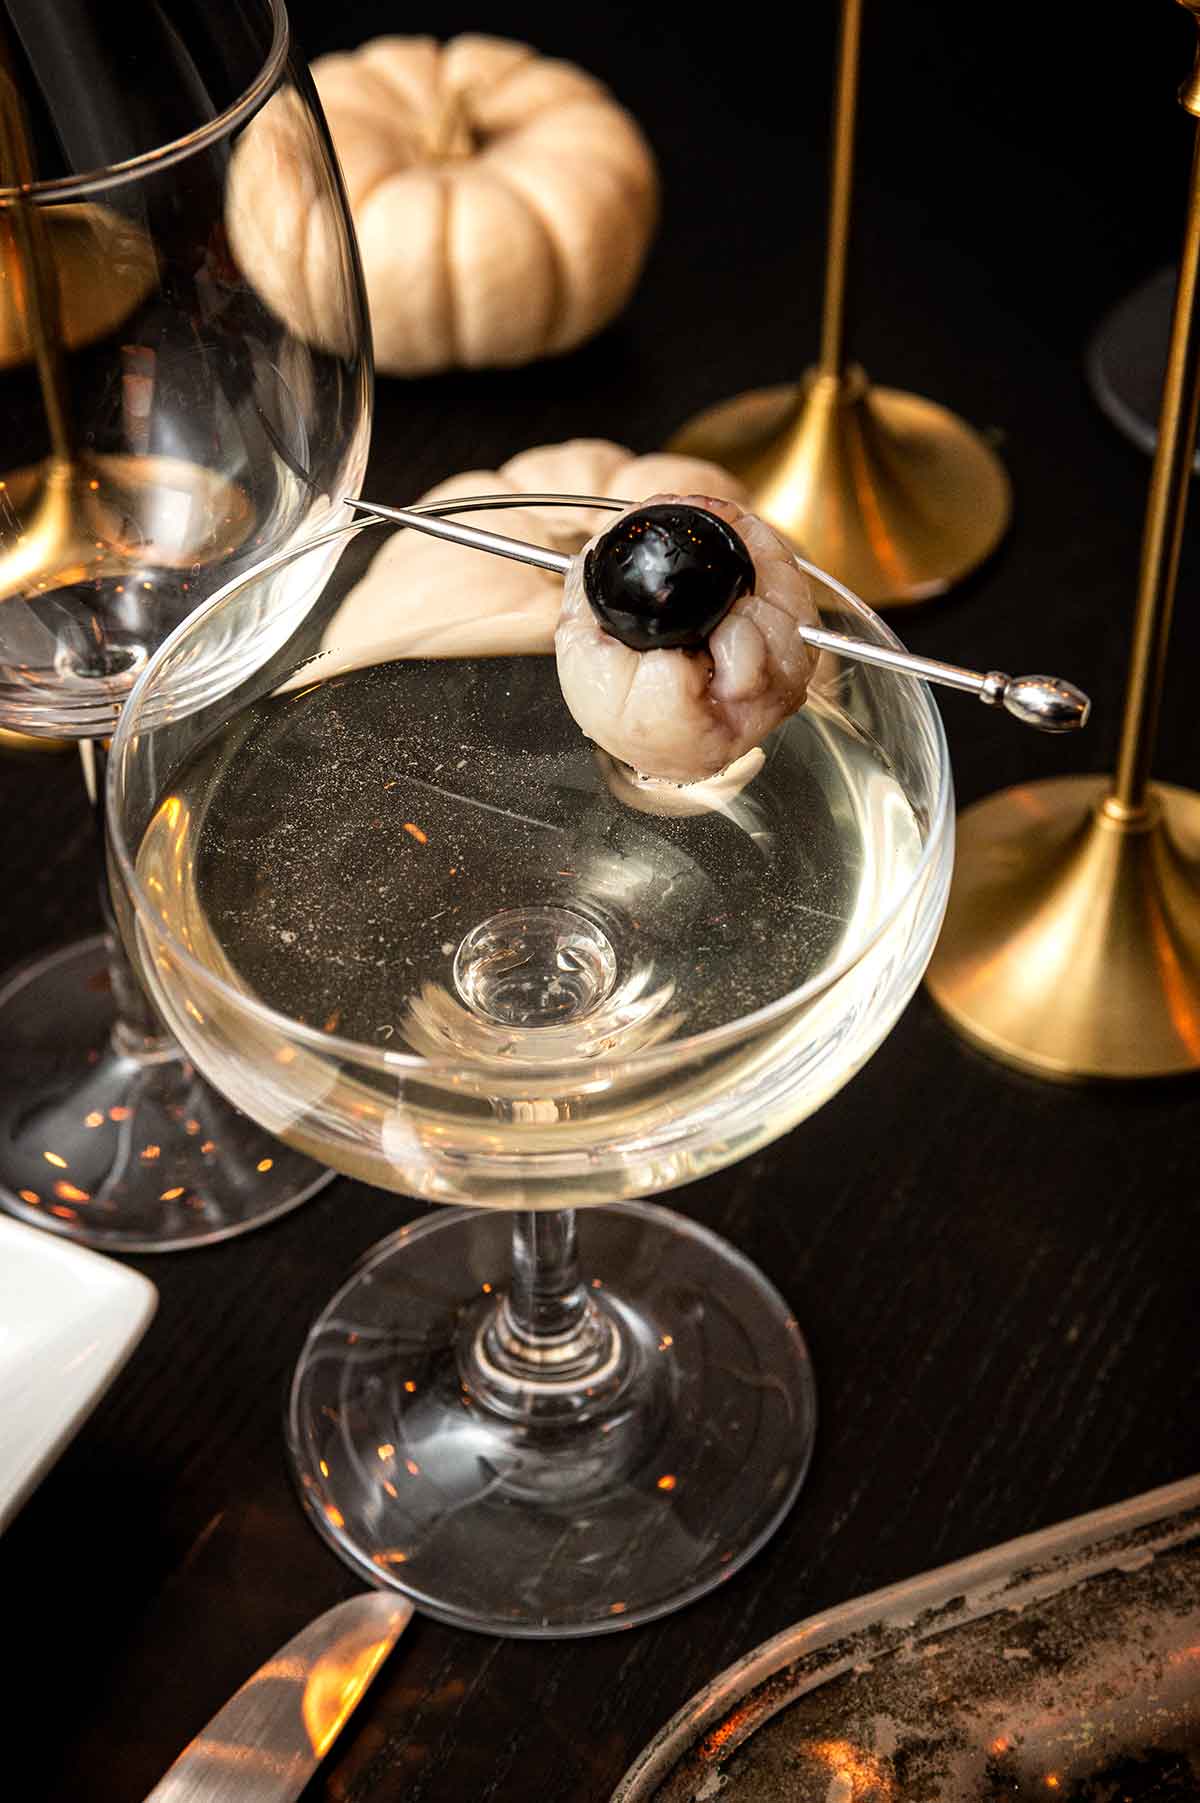 A cocktail with a garnish that looks like an eyeball.